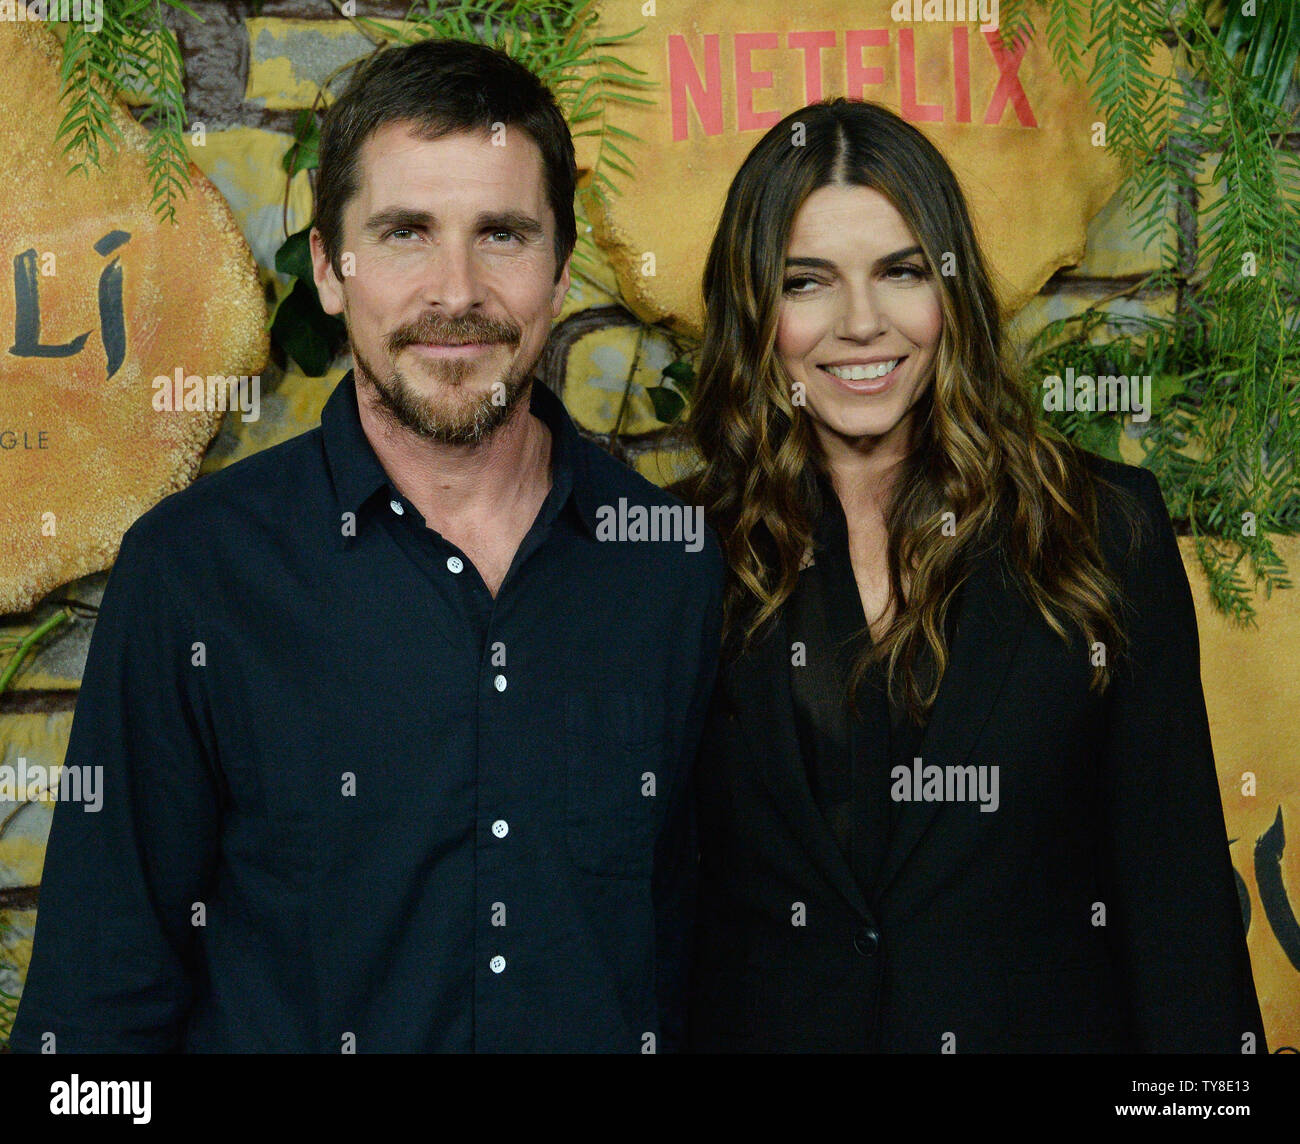 Cast member Christian Bale and his wife Sibi Blazic attend the premiere of the motion picture drama 'Mowgli: Legend of the Jungle' at the ArcLight Cinema Dome in the Hollywood section of Los Angeles on November 28, 2018. Based on the novel by Rudyard Kipling The story follows the upbringing of the human child Mowgli raised by a pack of wolves in the jungles of India. As he learns the often harsh rules of the jungle, under the tutelage of a bear named Baloo and a black panther named Bagheera, Mowgli becomes accepted by the animals of the jungle as one of their own, except for one; the fearsome Stock Photo